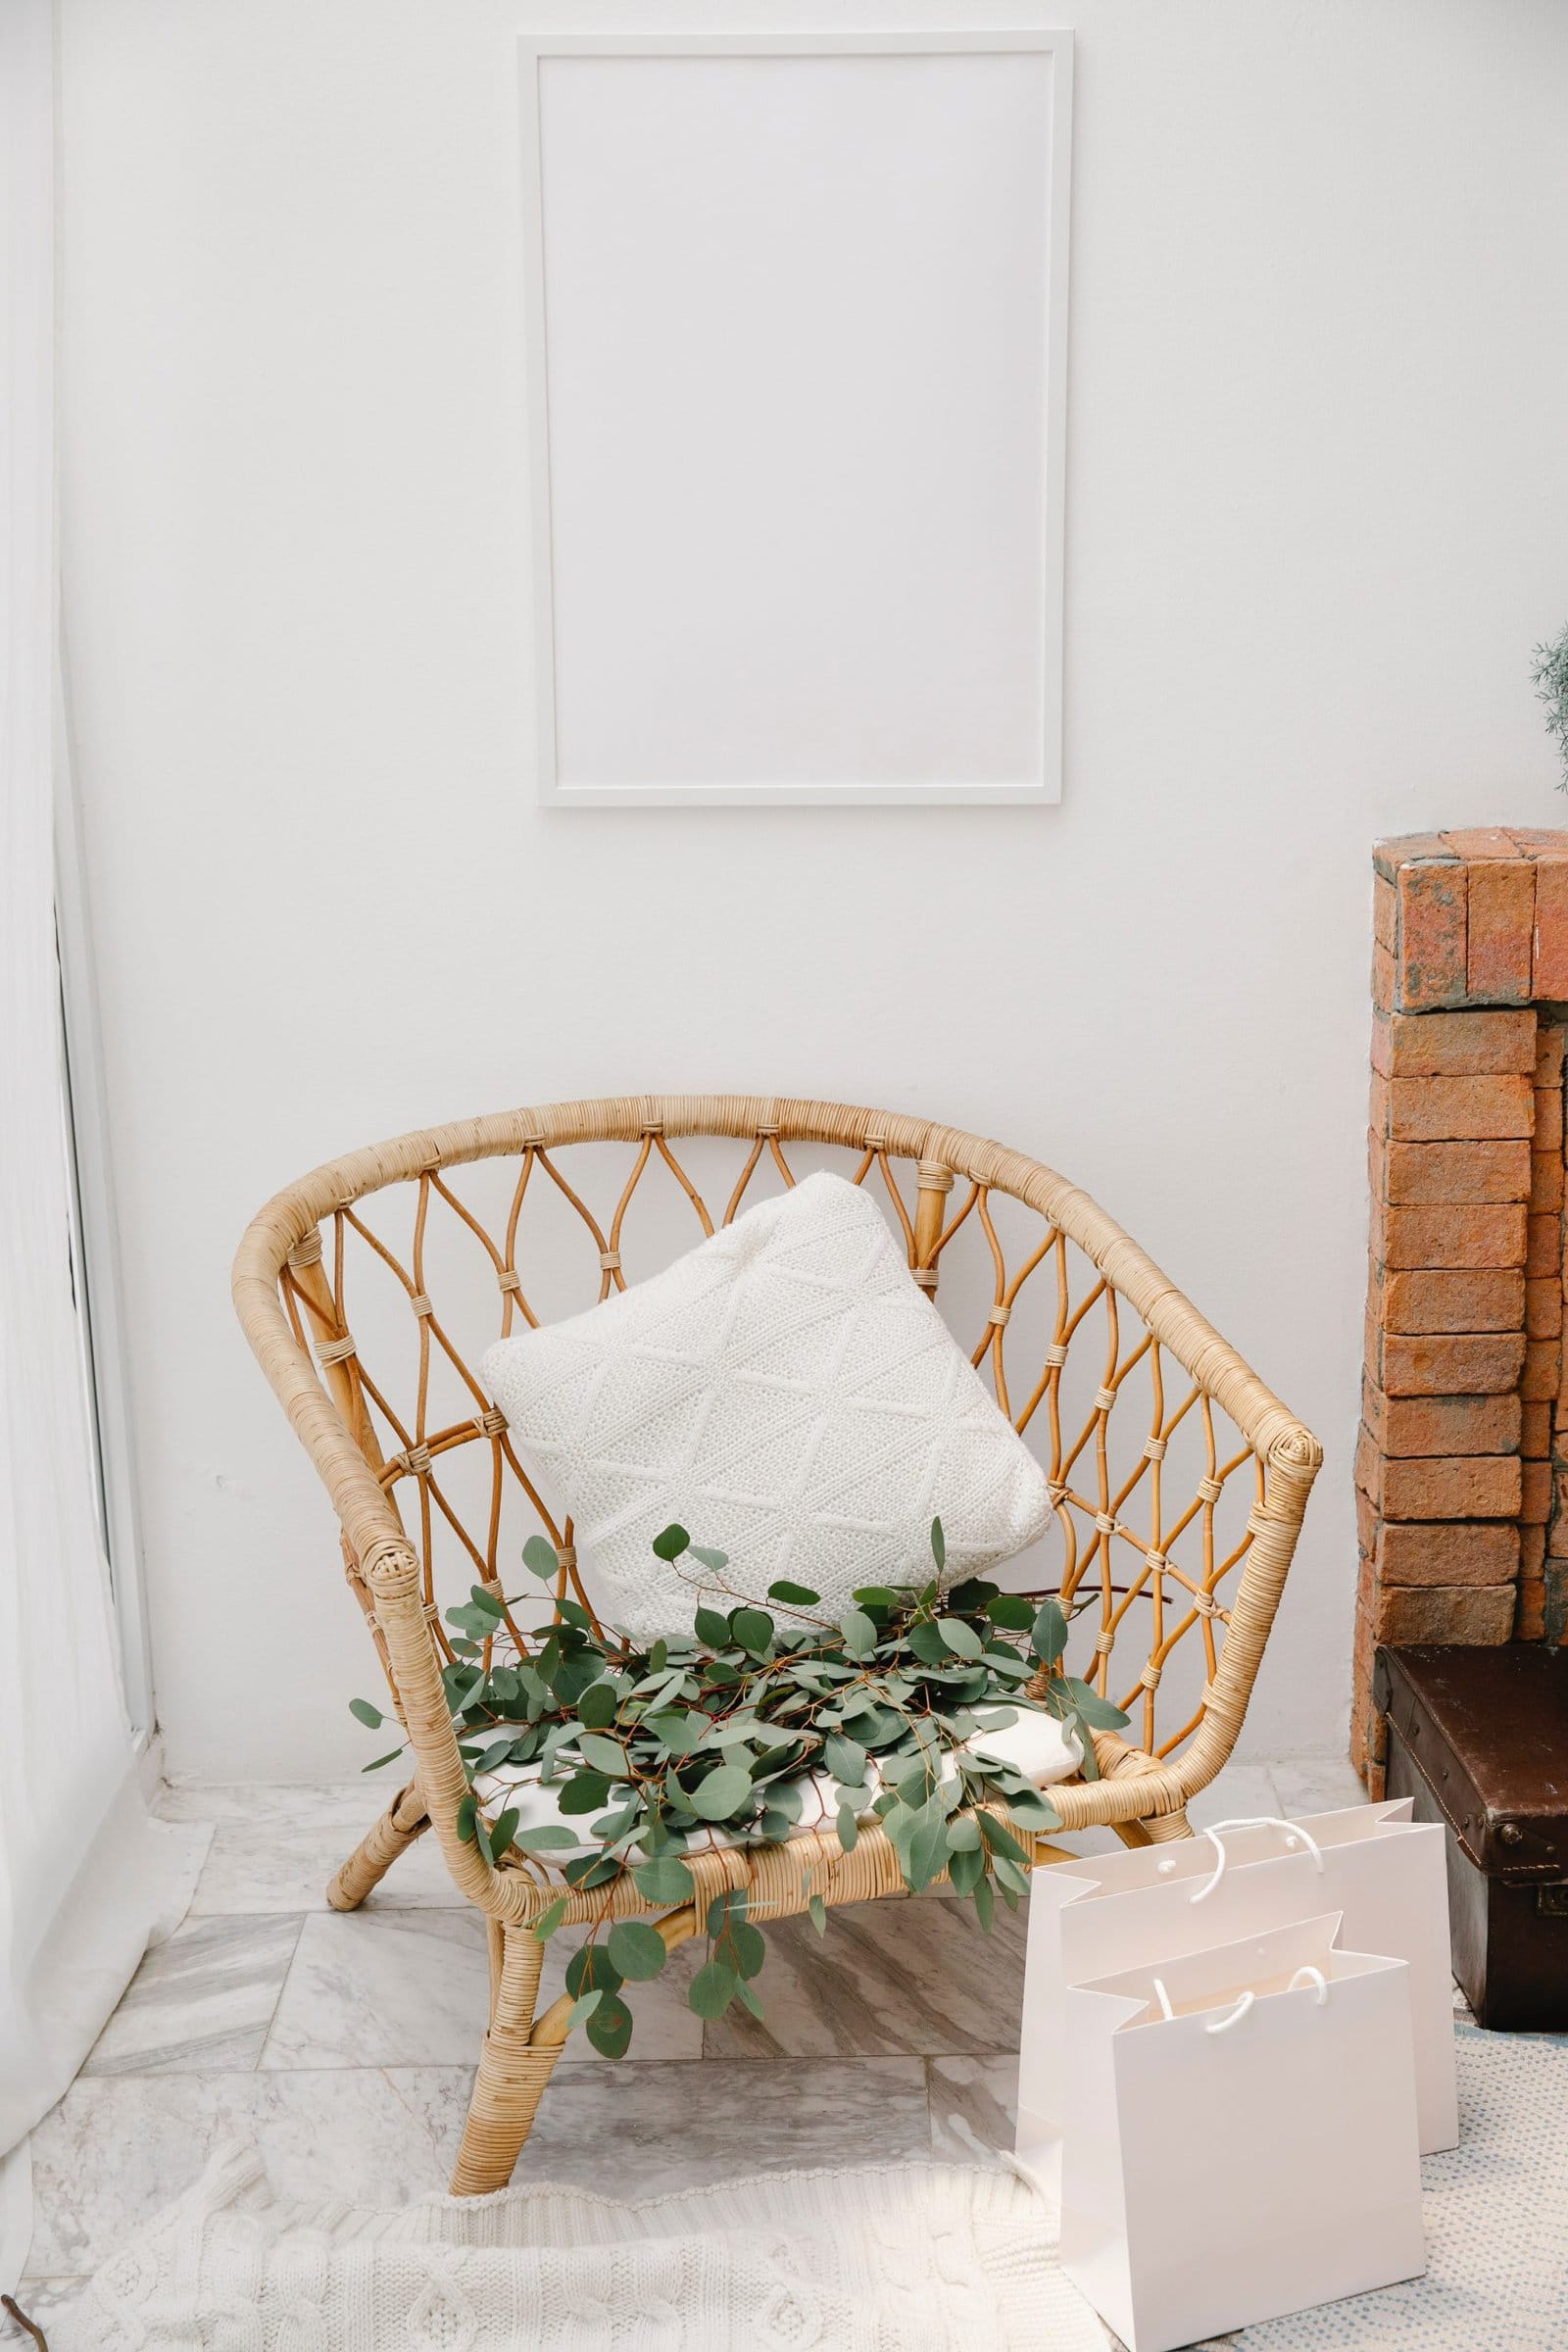  Rattan Chairs Are a Staple of the Coastal Look scaled